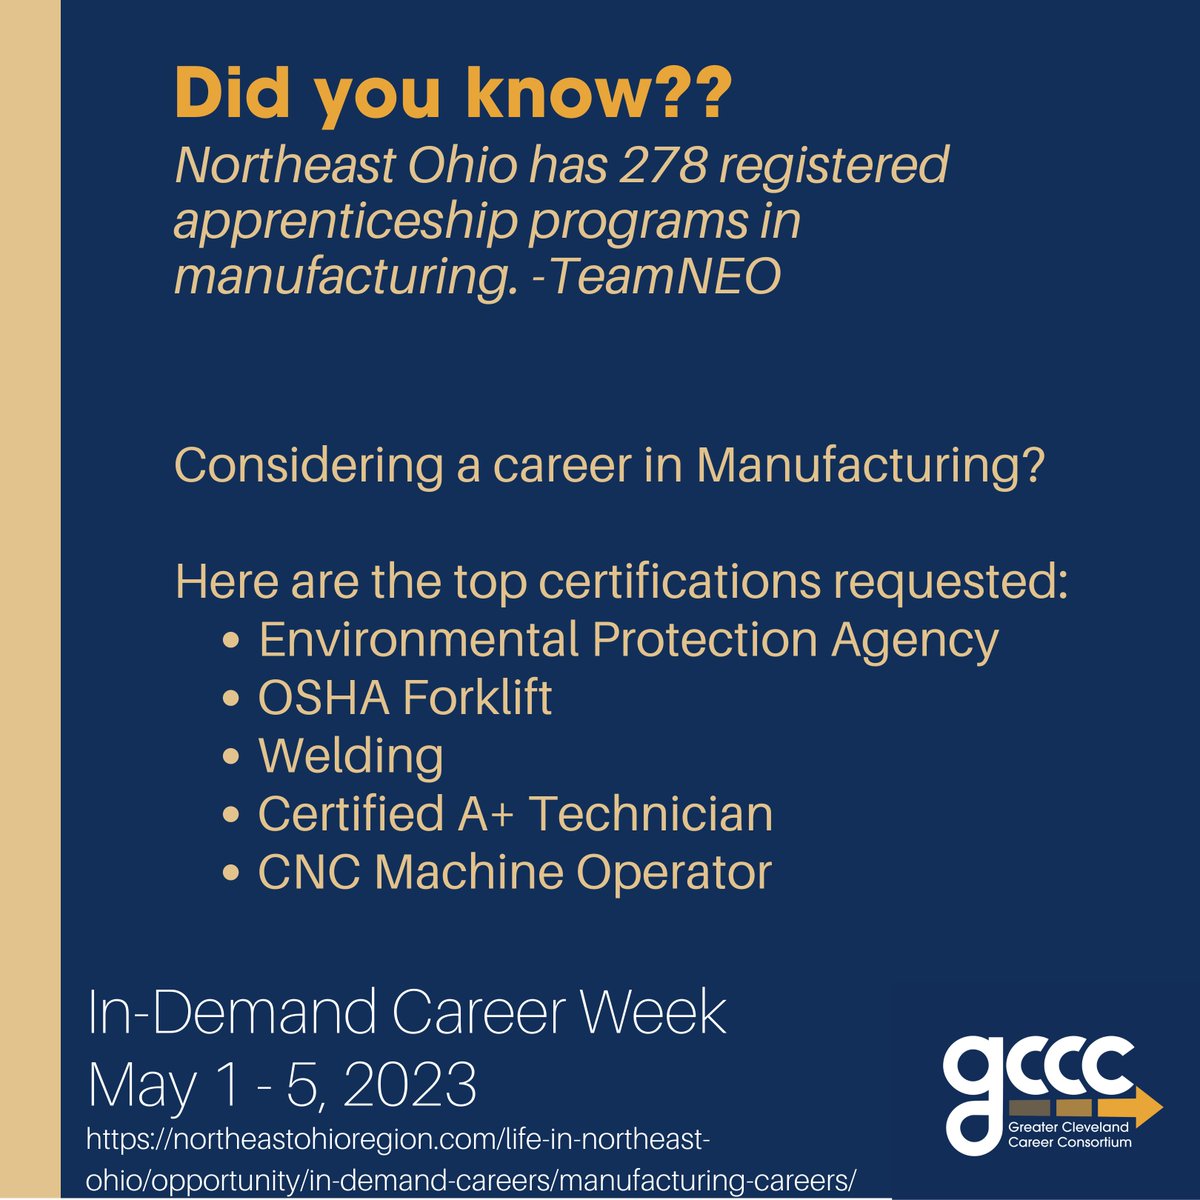 There isn't just one education option that leads to success in #manufacturing. Have you considered an apprenticeship?
According to @TeamNEO there are 278 #NortheastOhio.
Visit ow.ly/urk850O4lYj to explore and learn about top careers in manufacturing. 
#indemandjobsweek